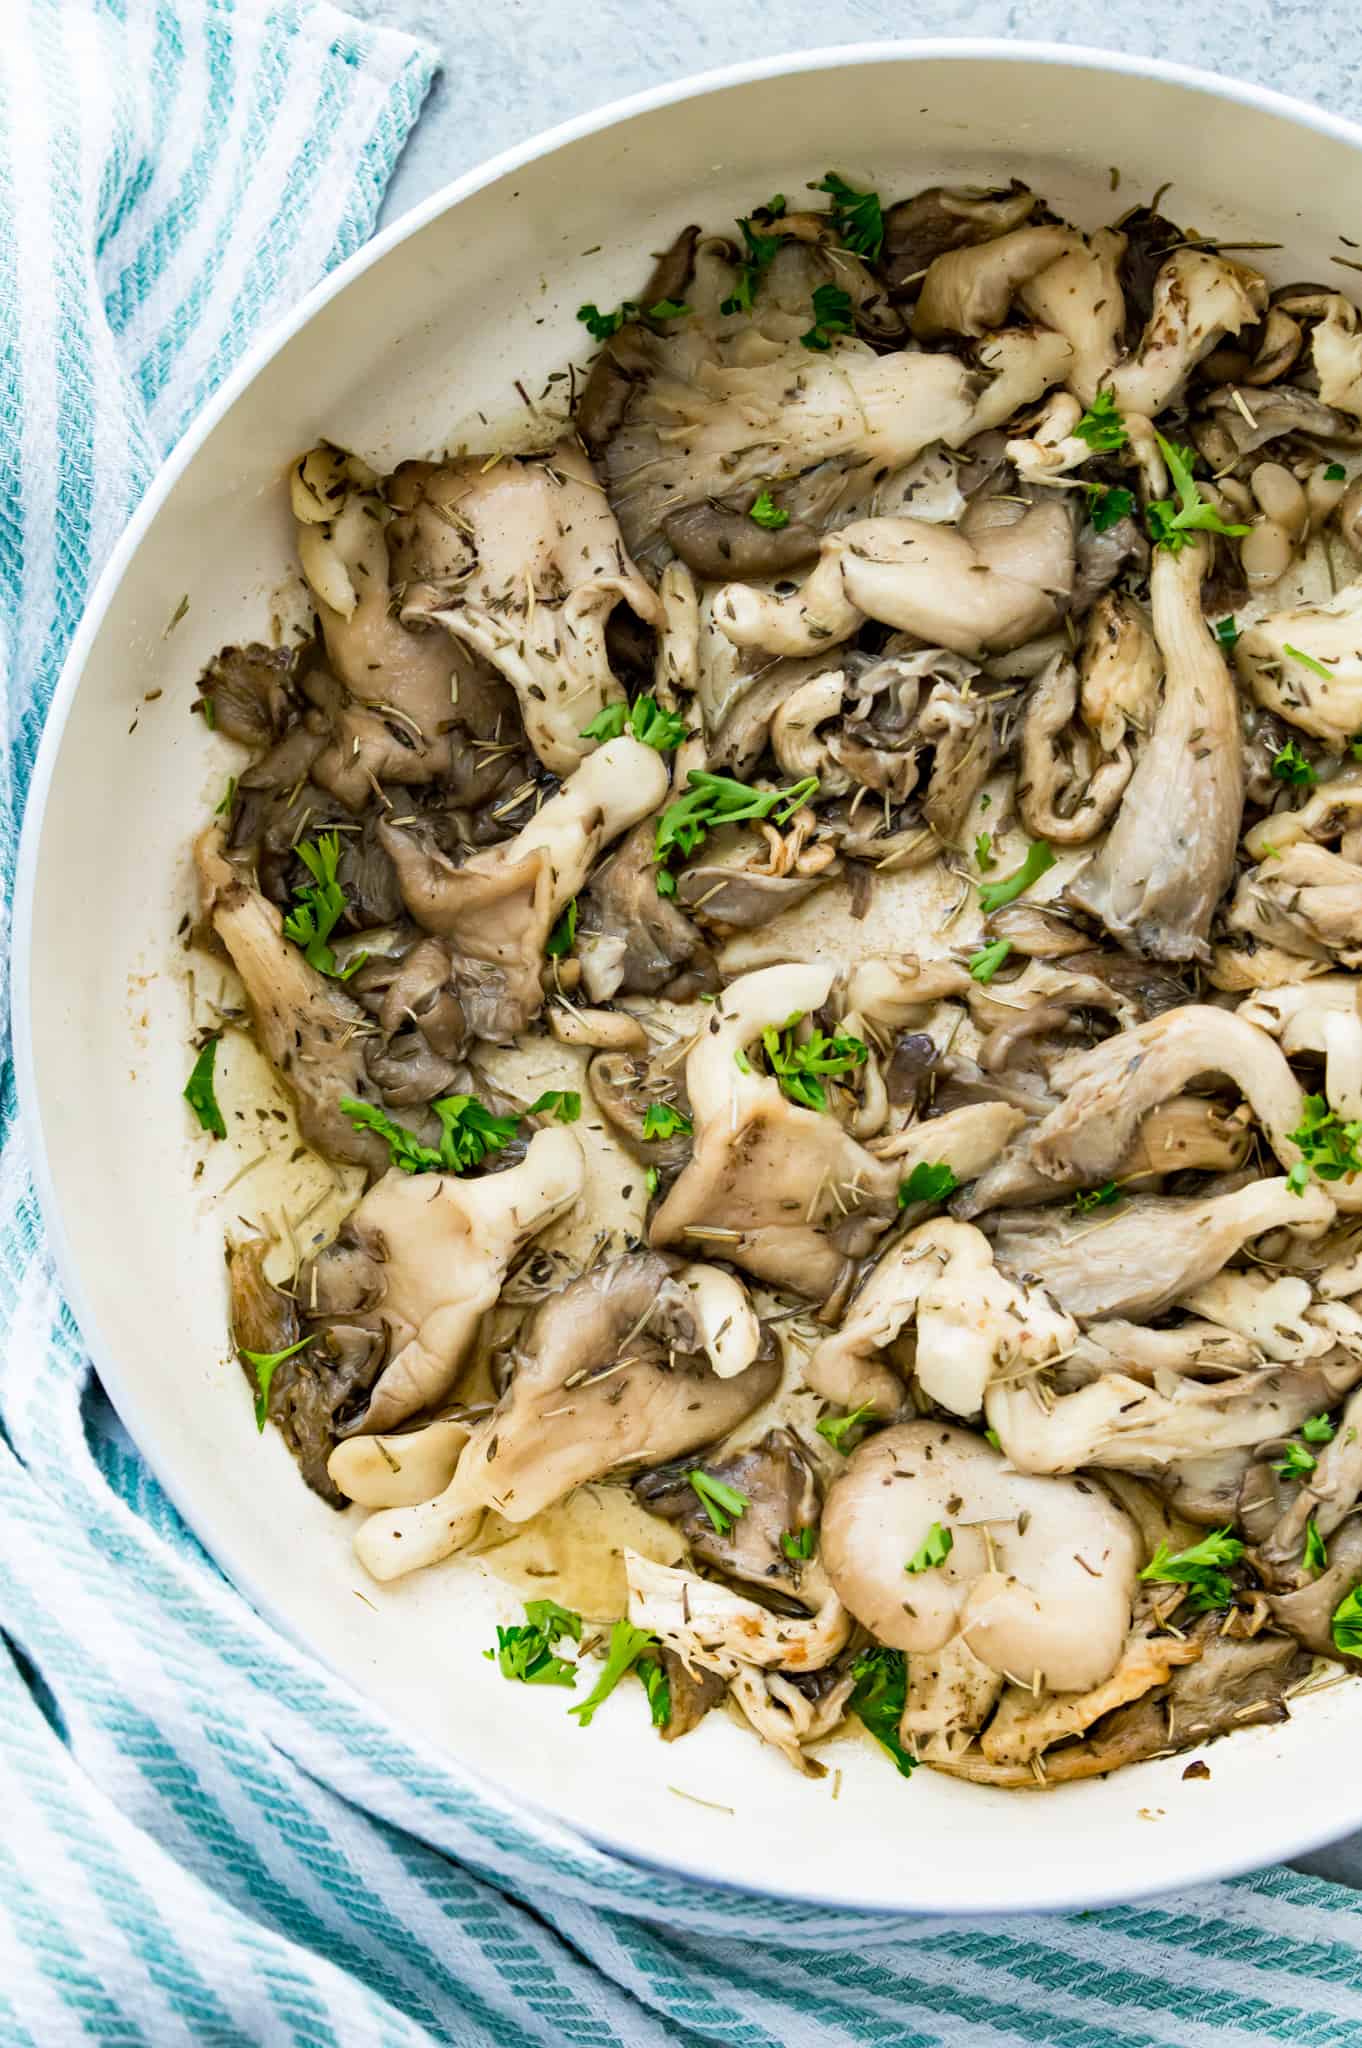 A pan of fried oyster mushrooms topped with fresh herbs